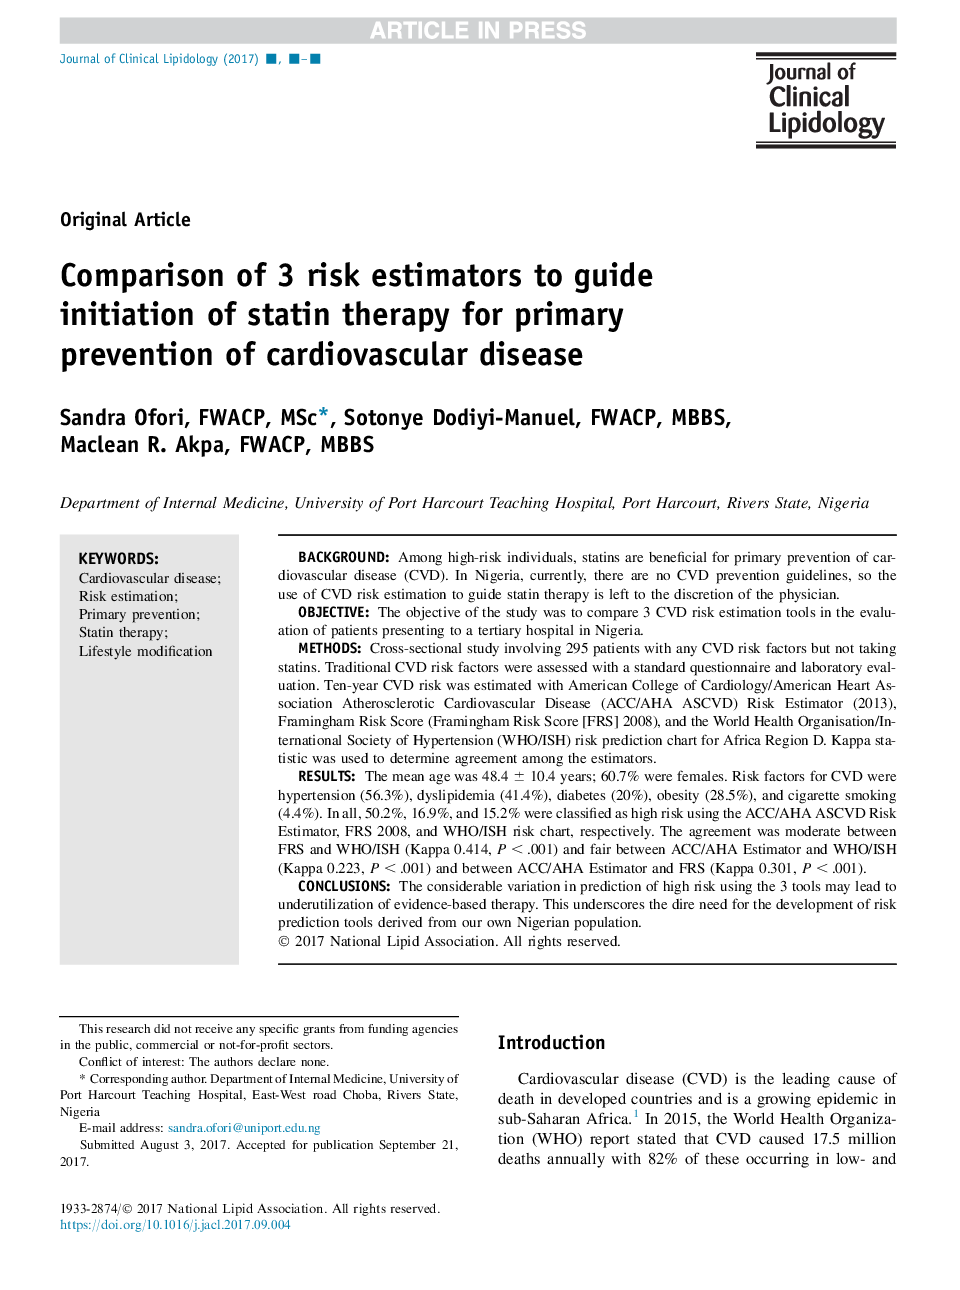 Comparison of 3 risk estimators to guide initiation of statin therapy for primary prevention of cardiovascular disease